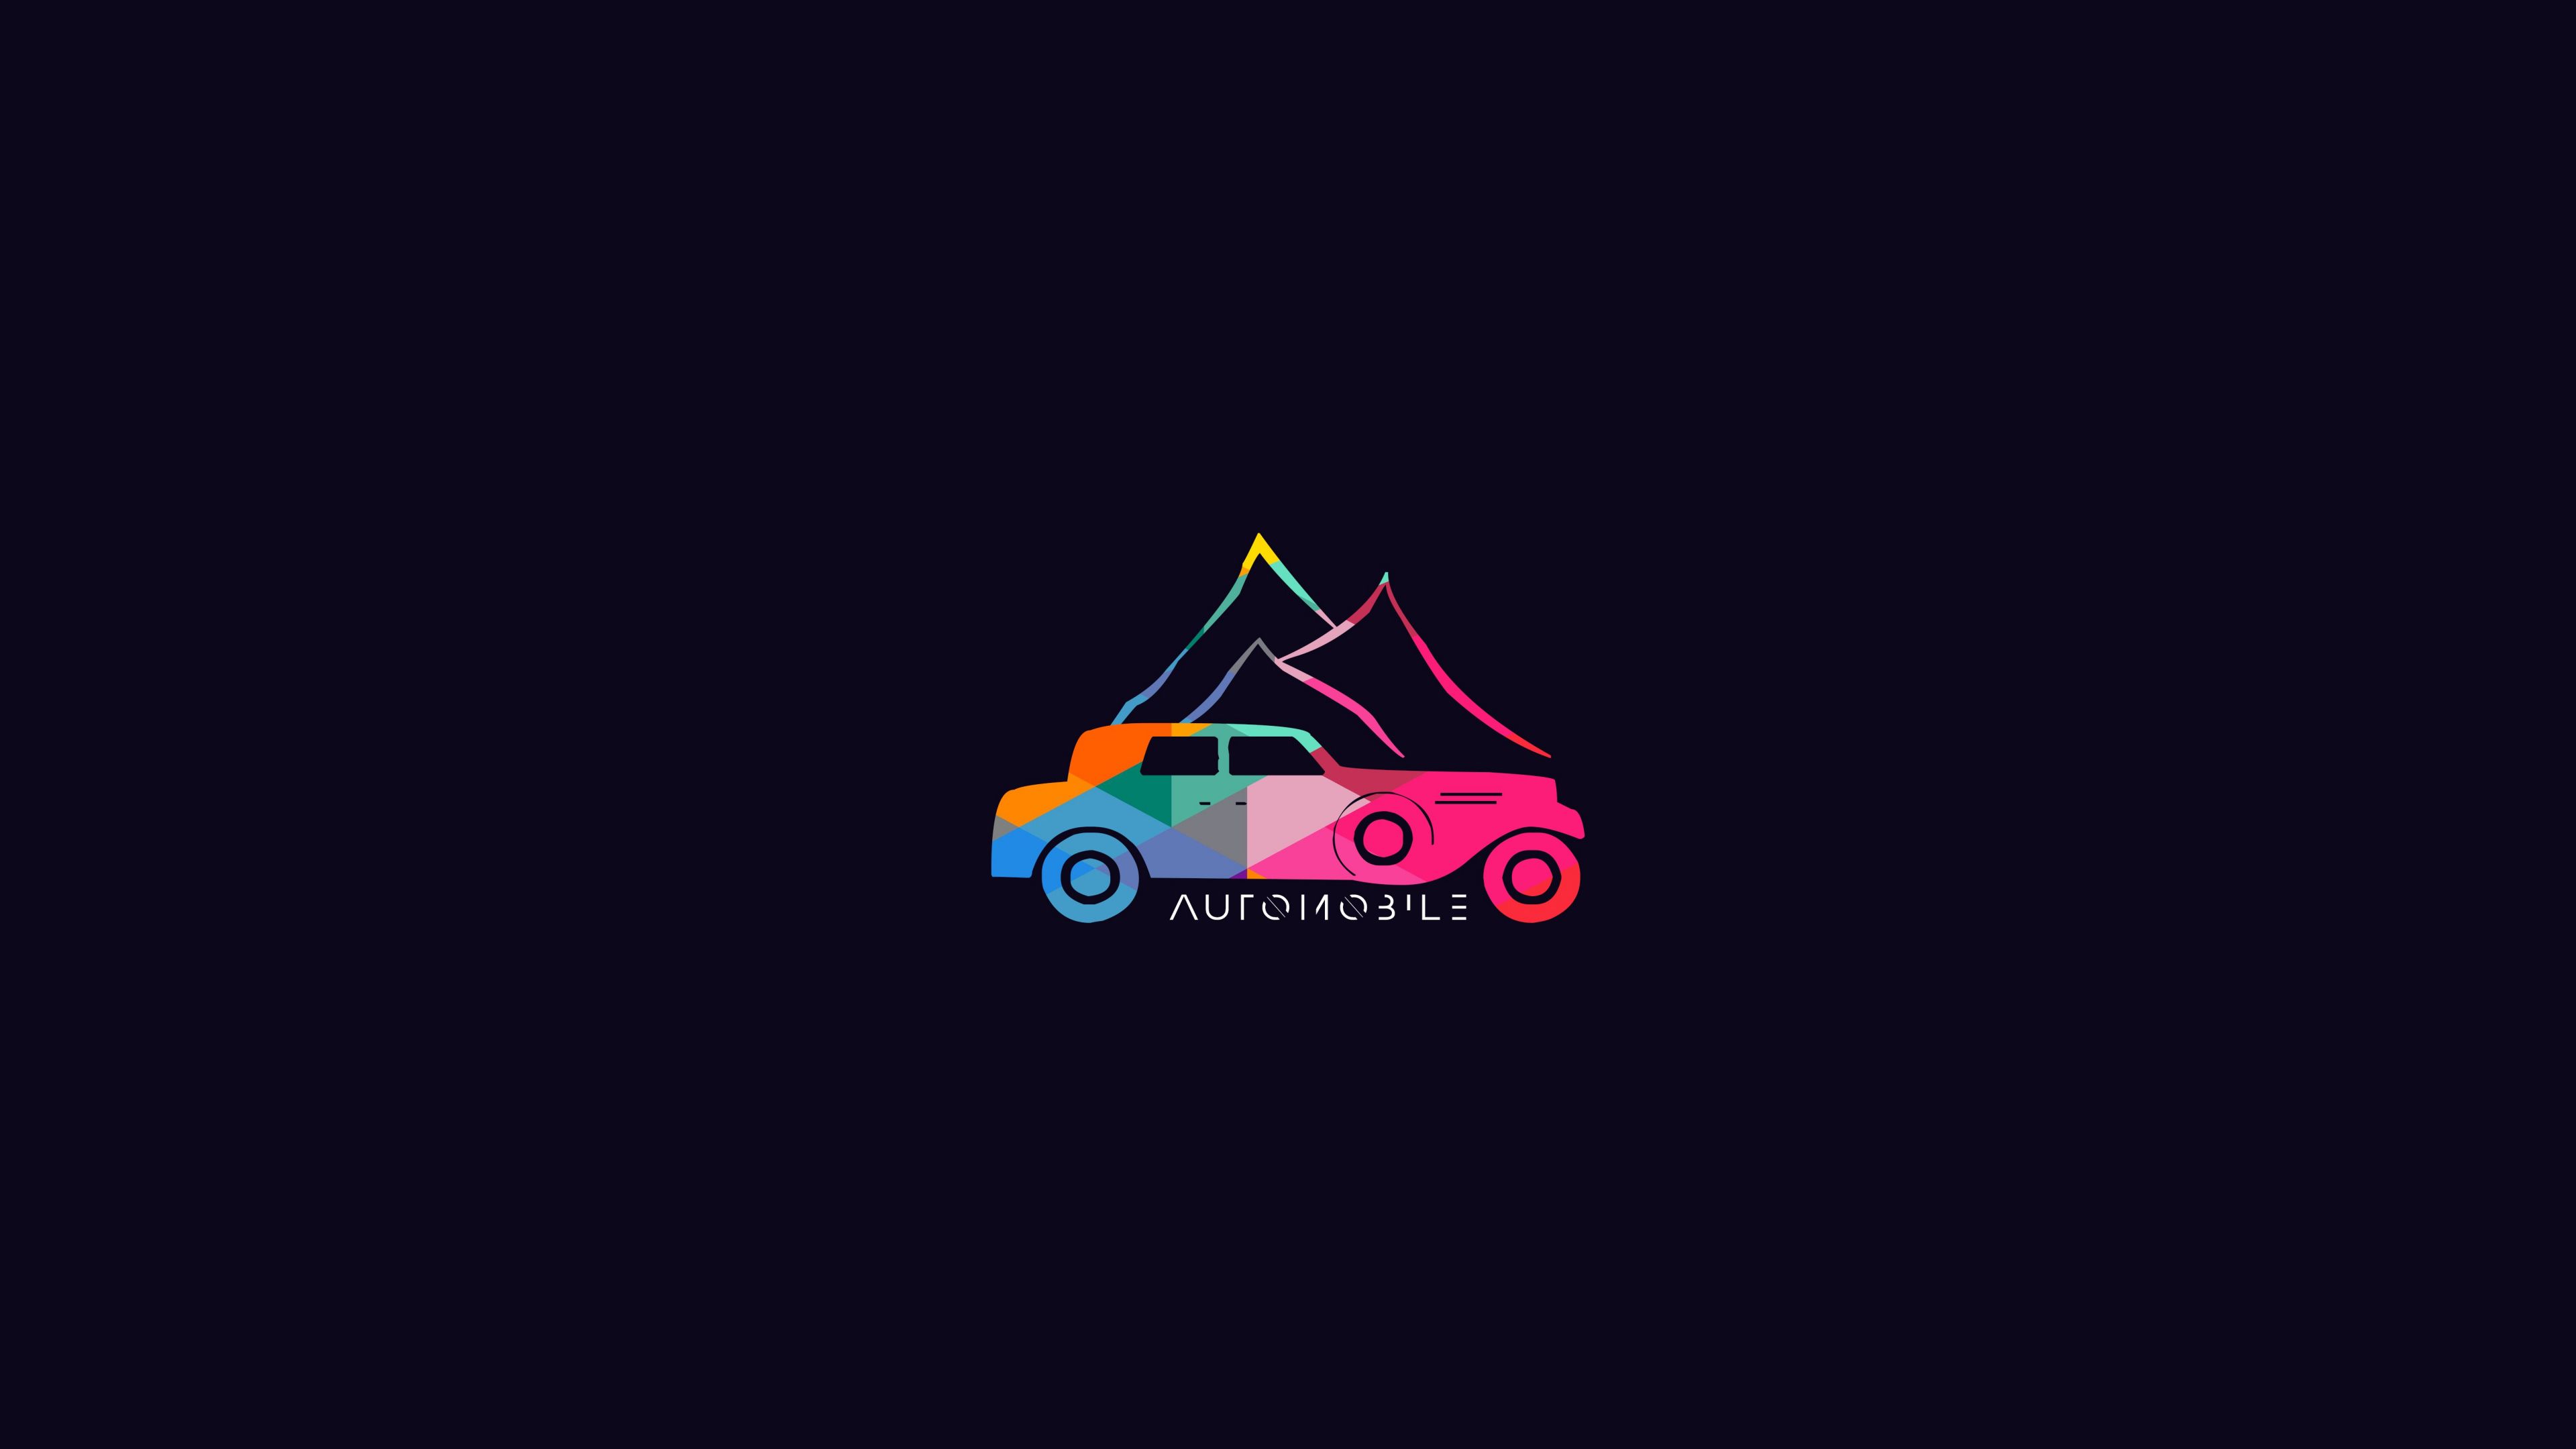 Desktop Wallpaper Car, Mountains, Colorful, Minimal, HD Image, Picture, Background, Nwpvzh